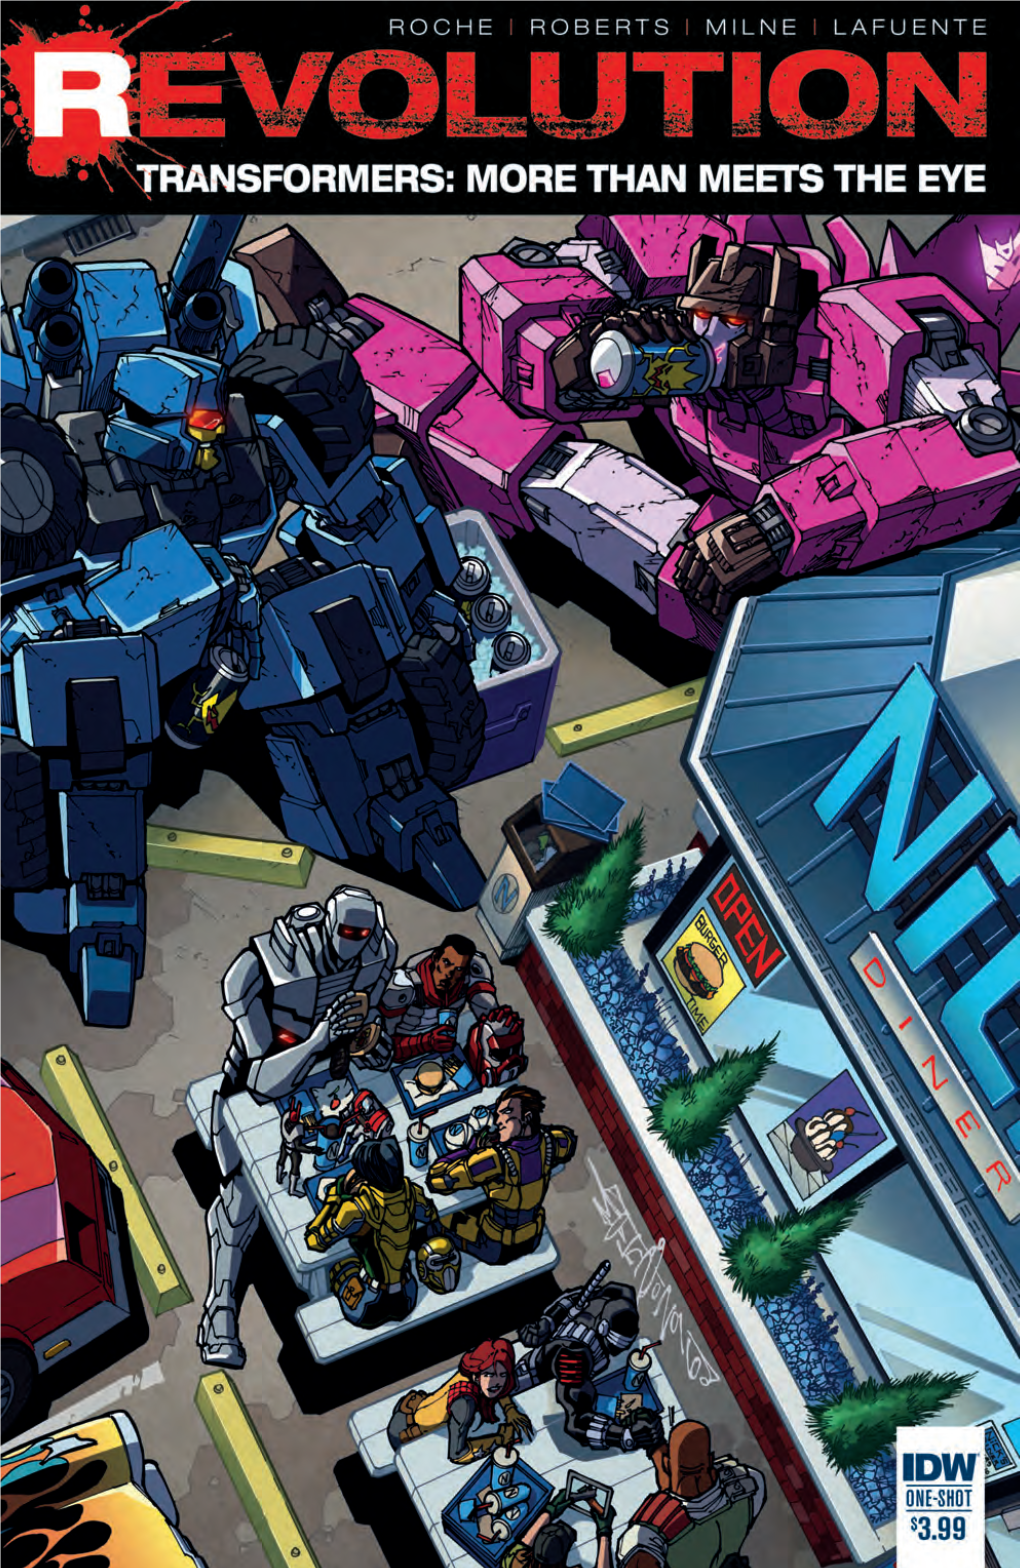 Transformers: More Than Meets the Eye Revolution #1